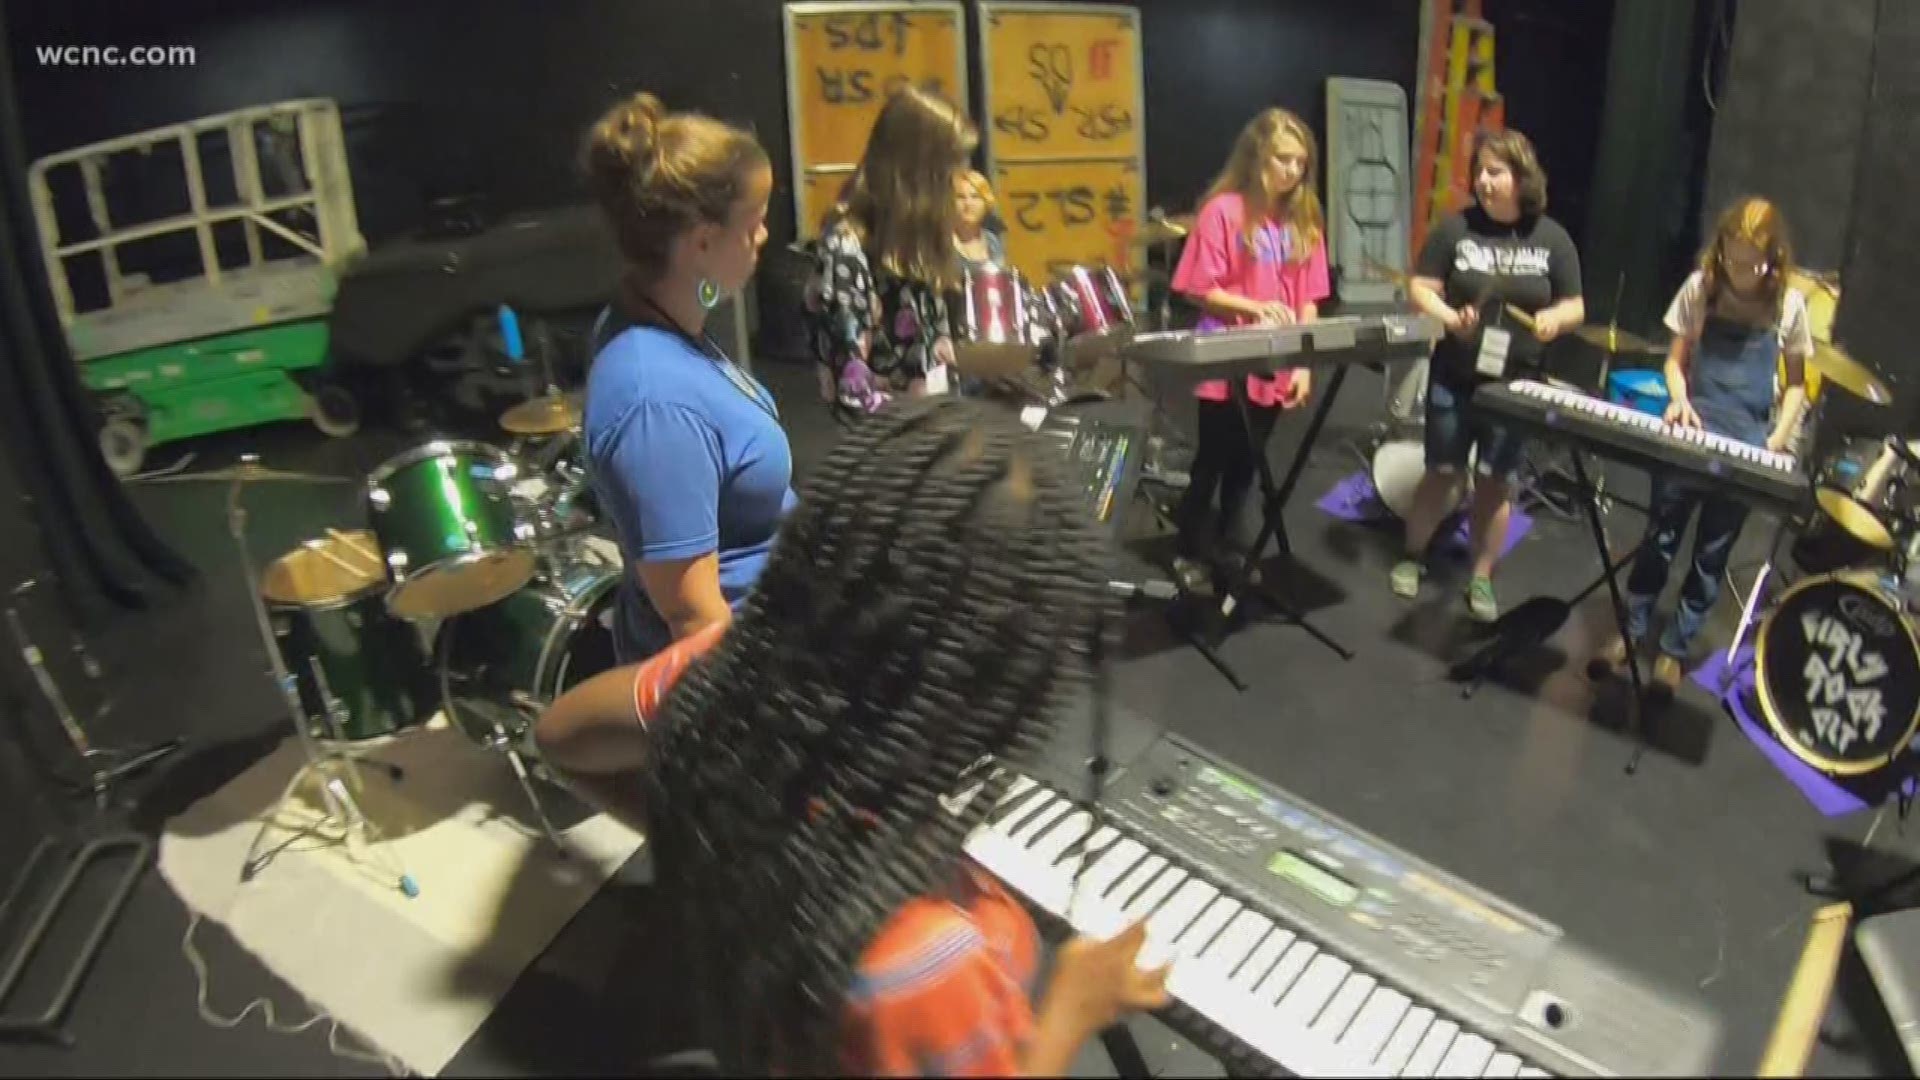 Girls Rock is a local nonprofit that focuses on building a community of empowered young people and the mission is to empower these campers through music education.